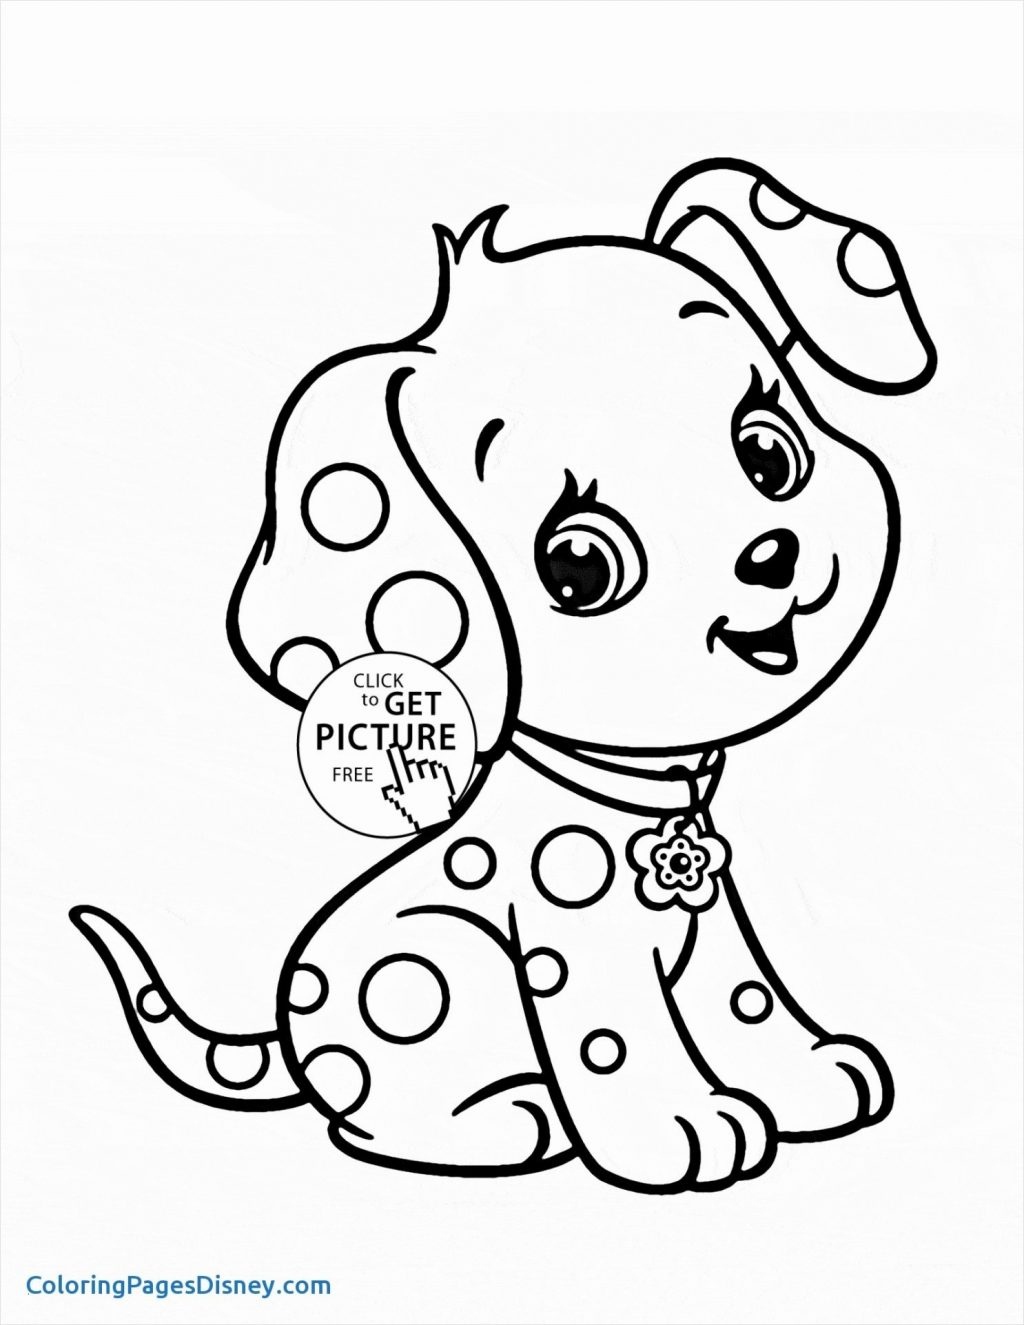 Coloring Page ~ Colorings Free Printable For Adults Advanced - Free Printable Coloring Books Pdf